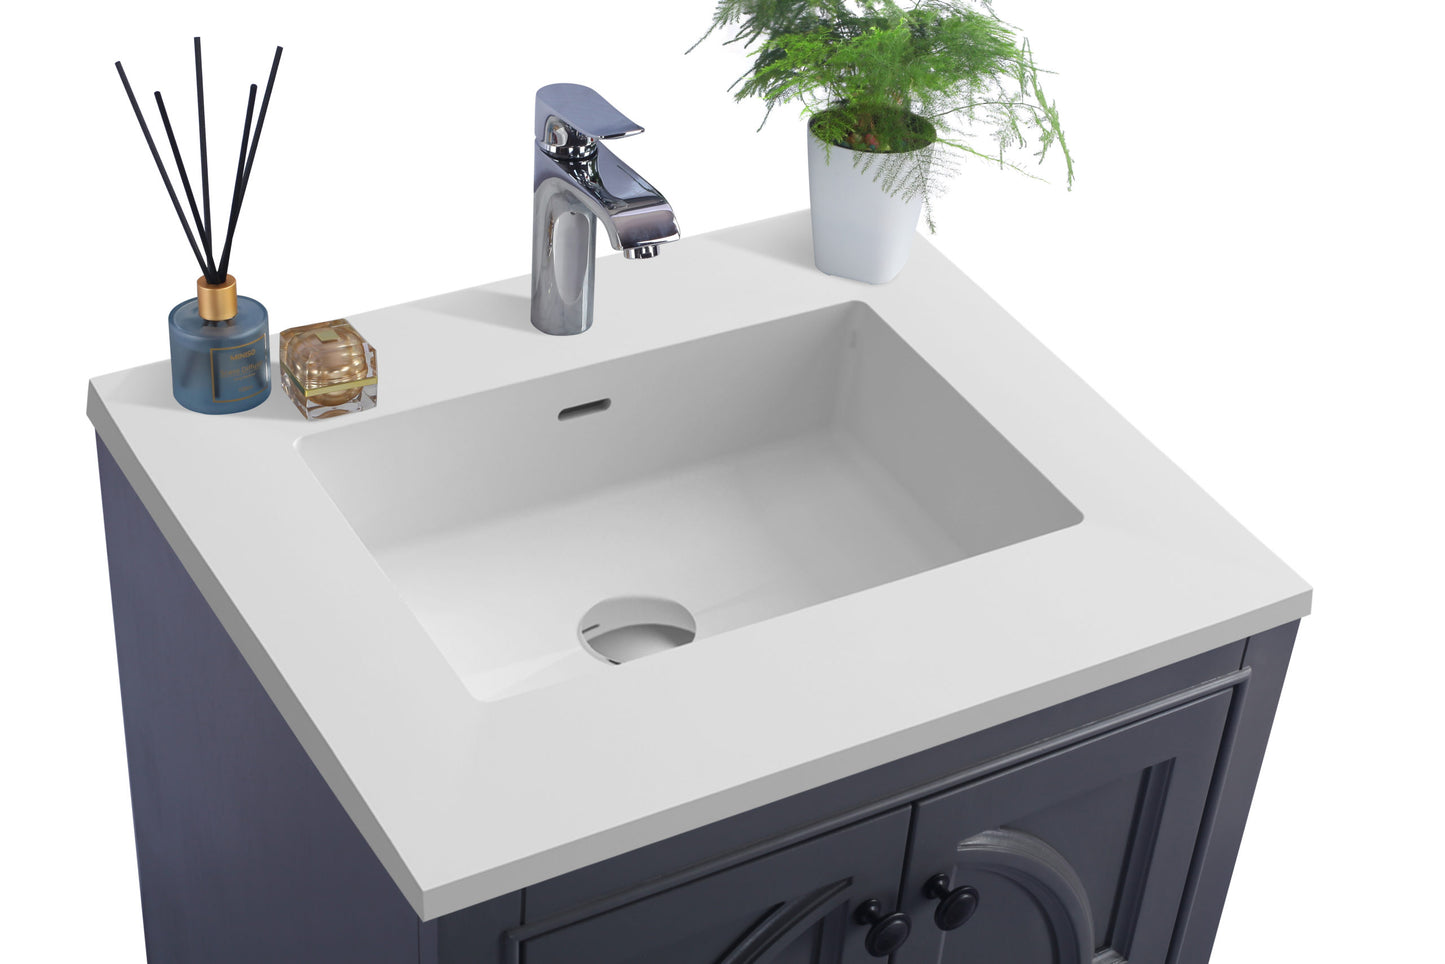 Odyssey 24" Maple Grey Bathroom Vanity with Matte White VIVA Stone Solid Surface Countertop